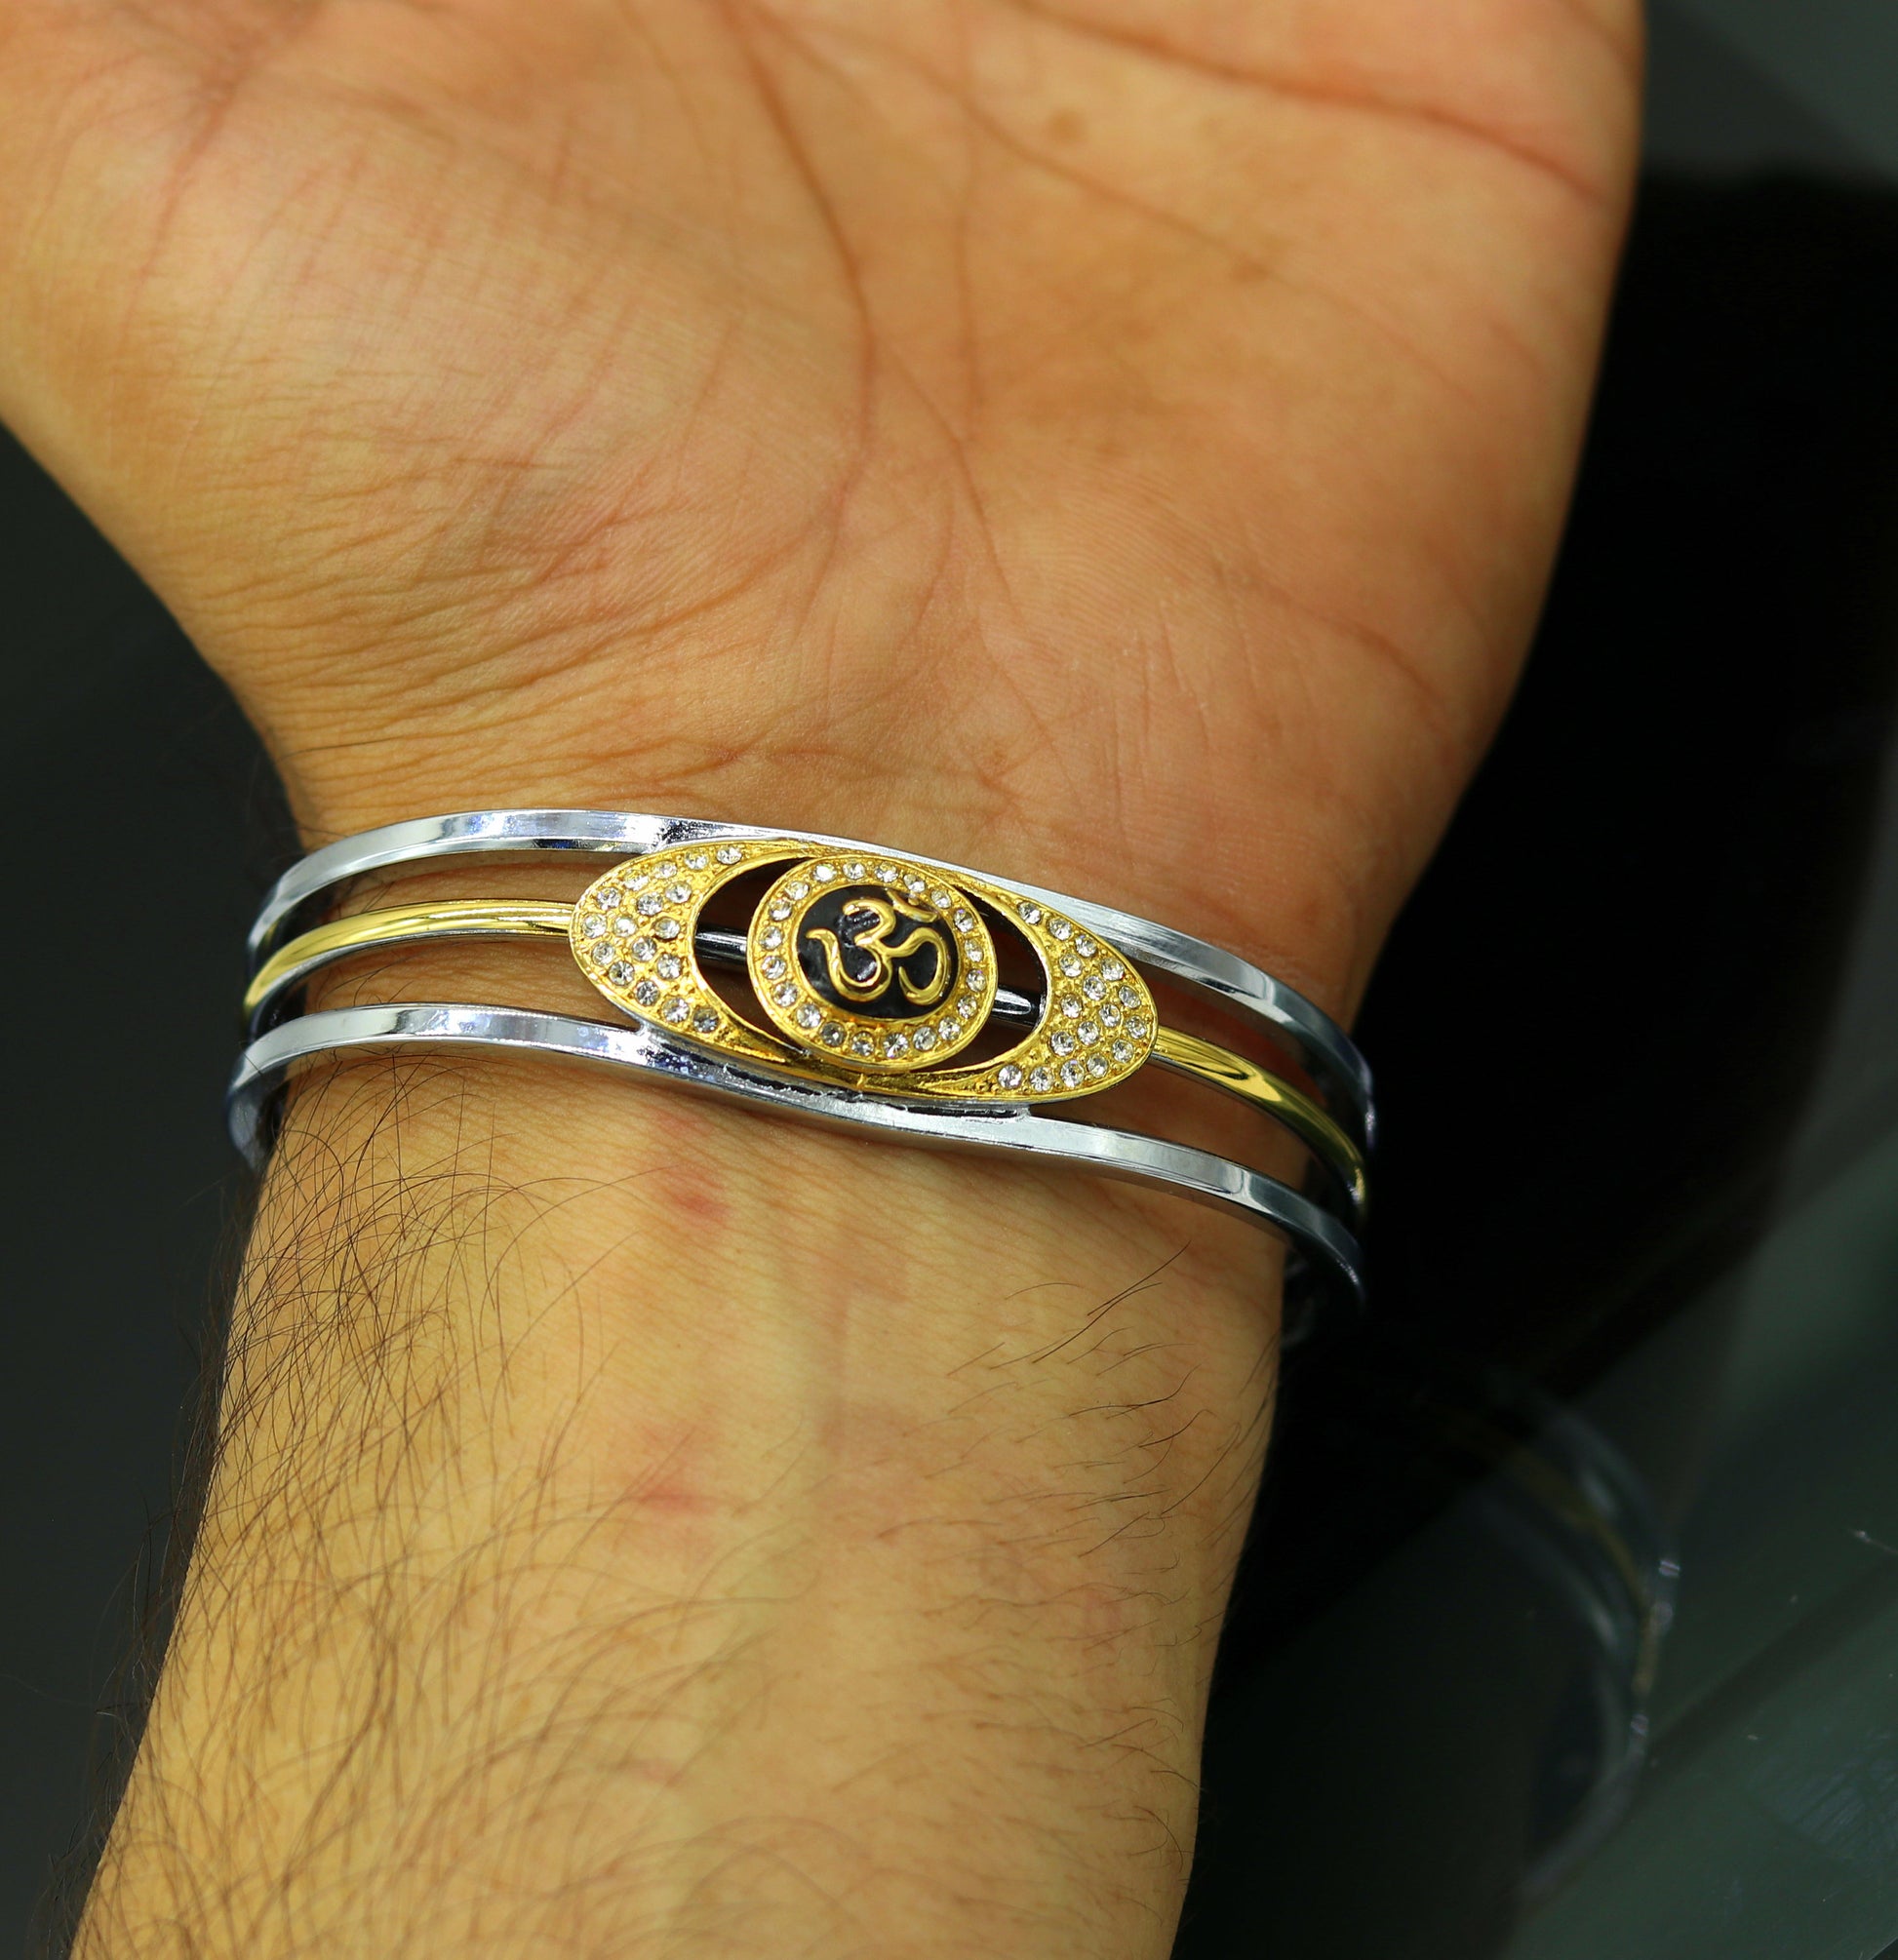 Sterling silver handmade 'Aum' design gold plated design unisex bangle bracelet kada, awesome adjustable customized gifting jewelry nsk304 - TRIBAL ORNAMENTS